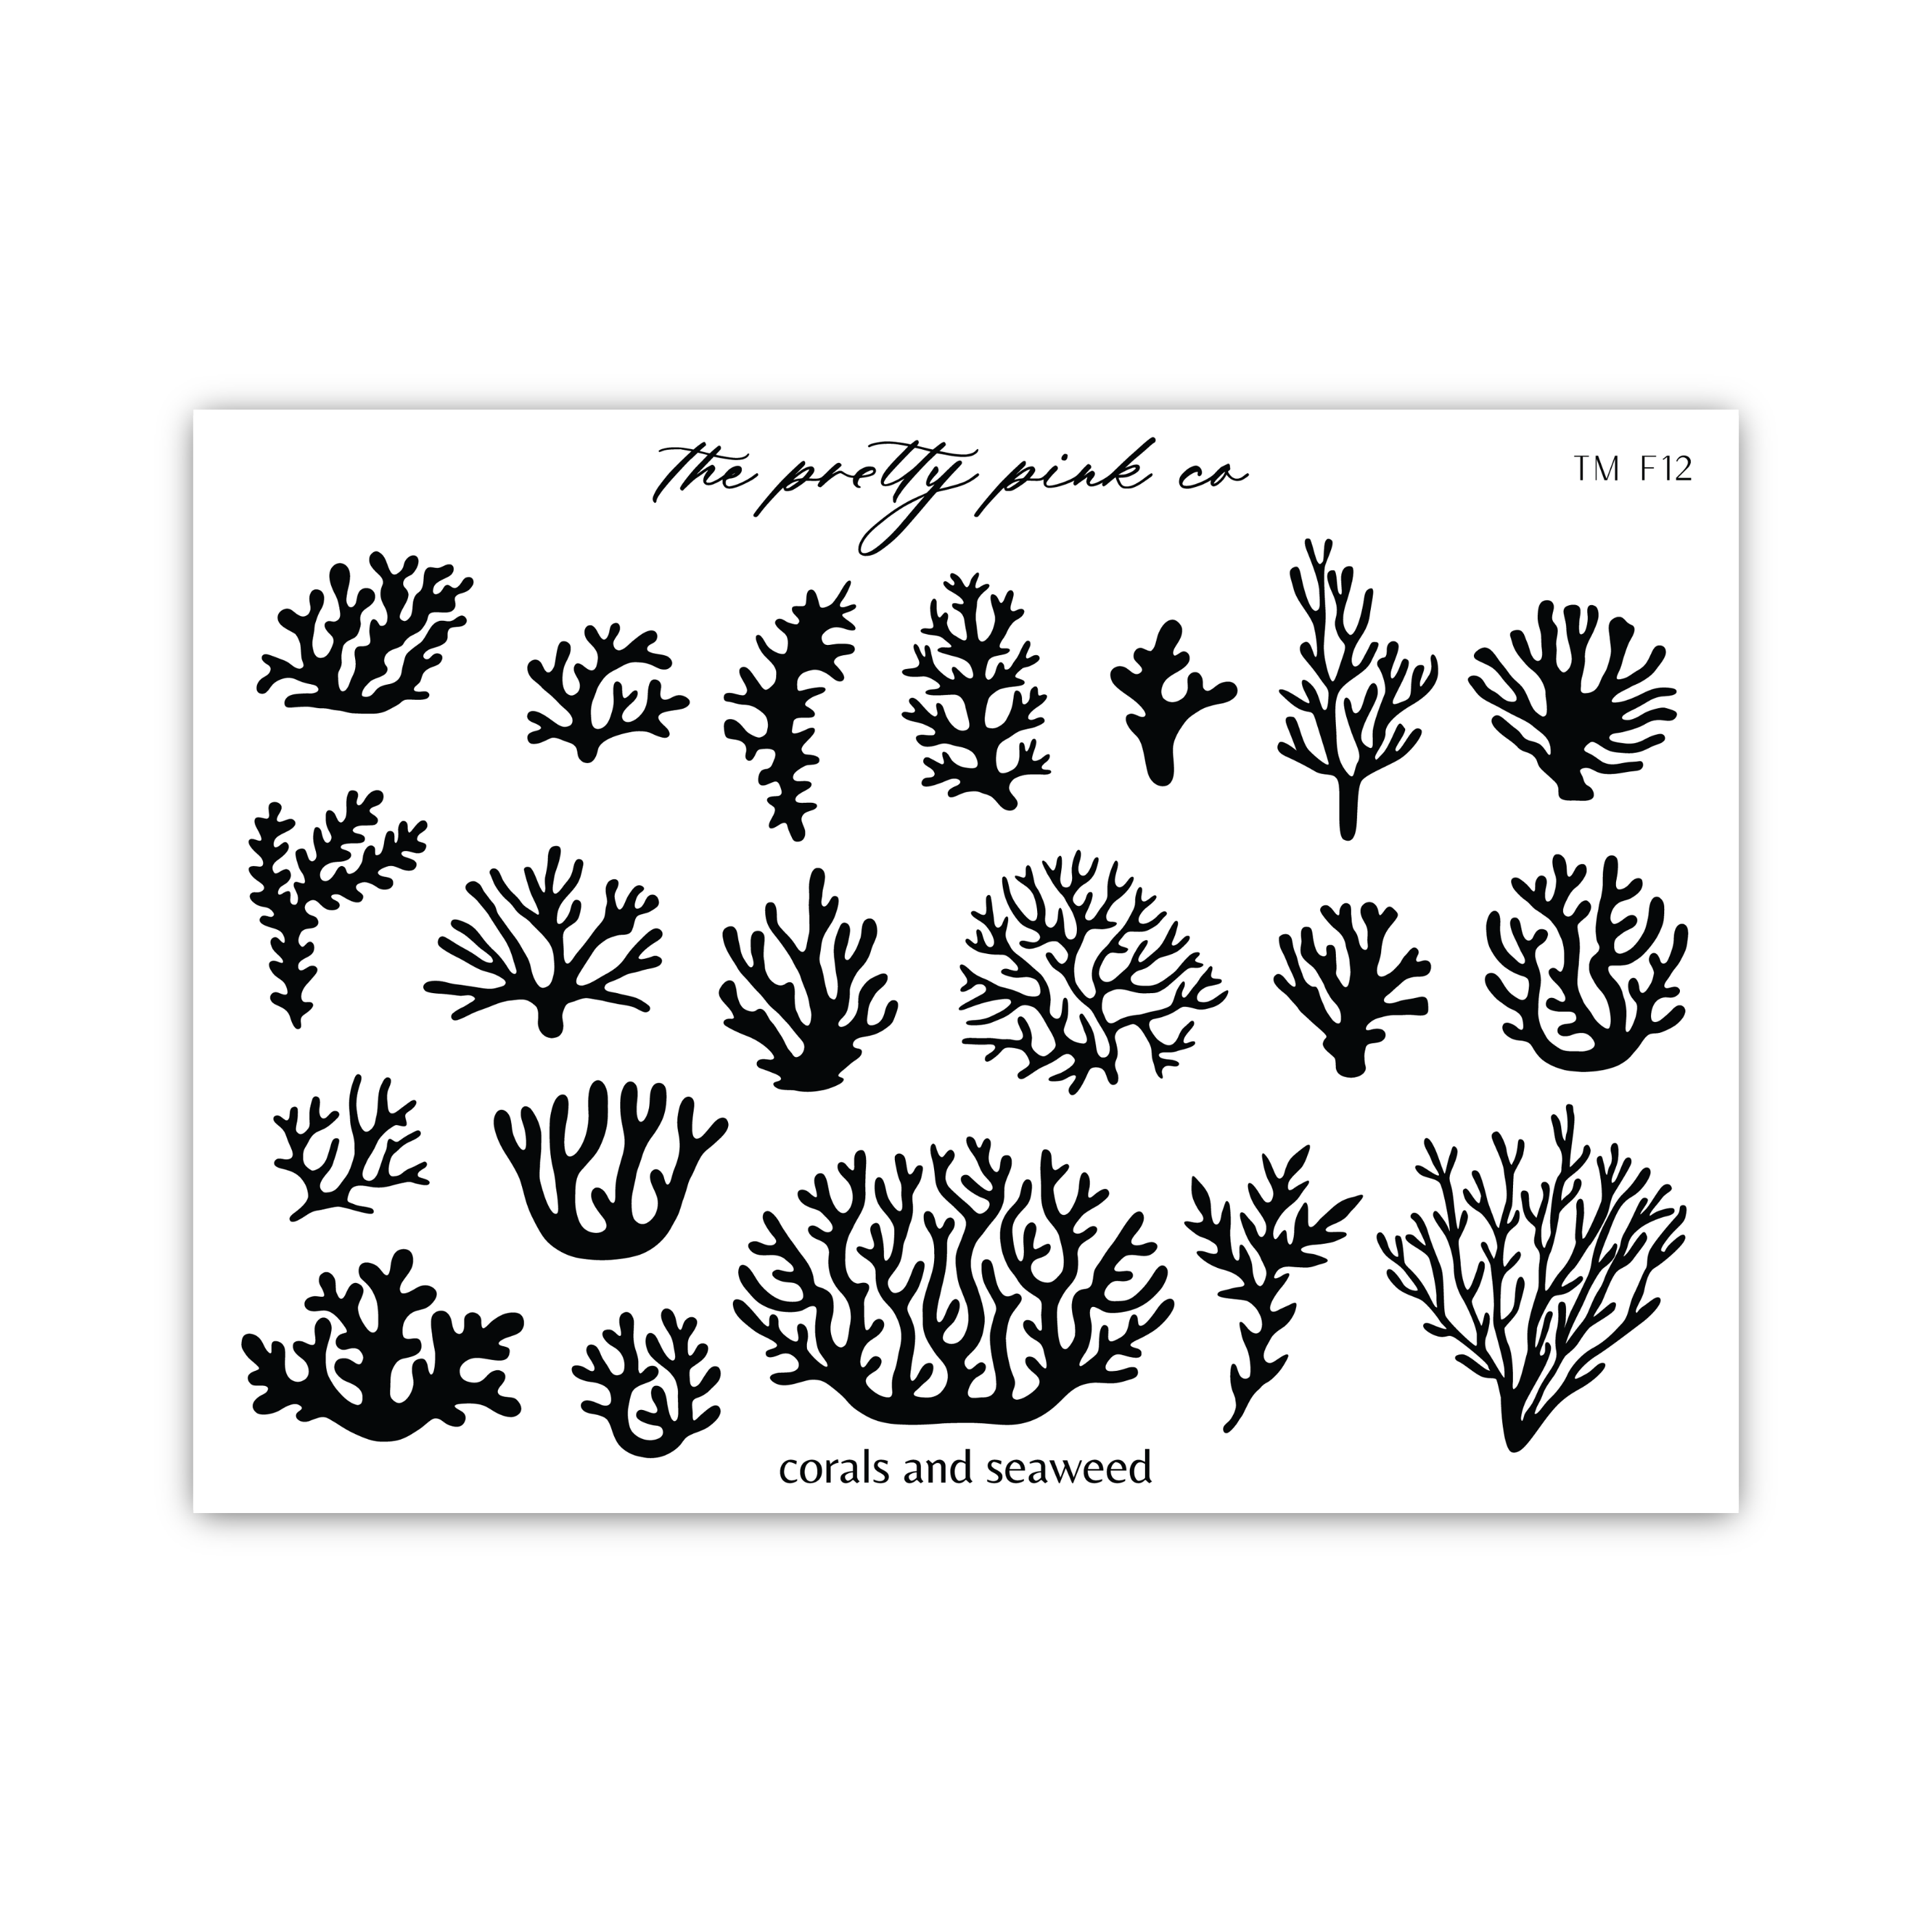 a black and white picture of corals and seaweed